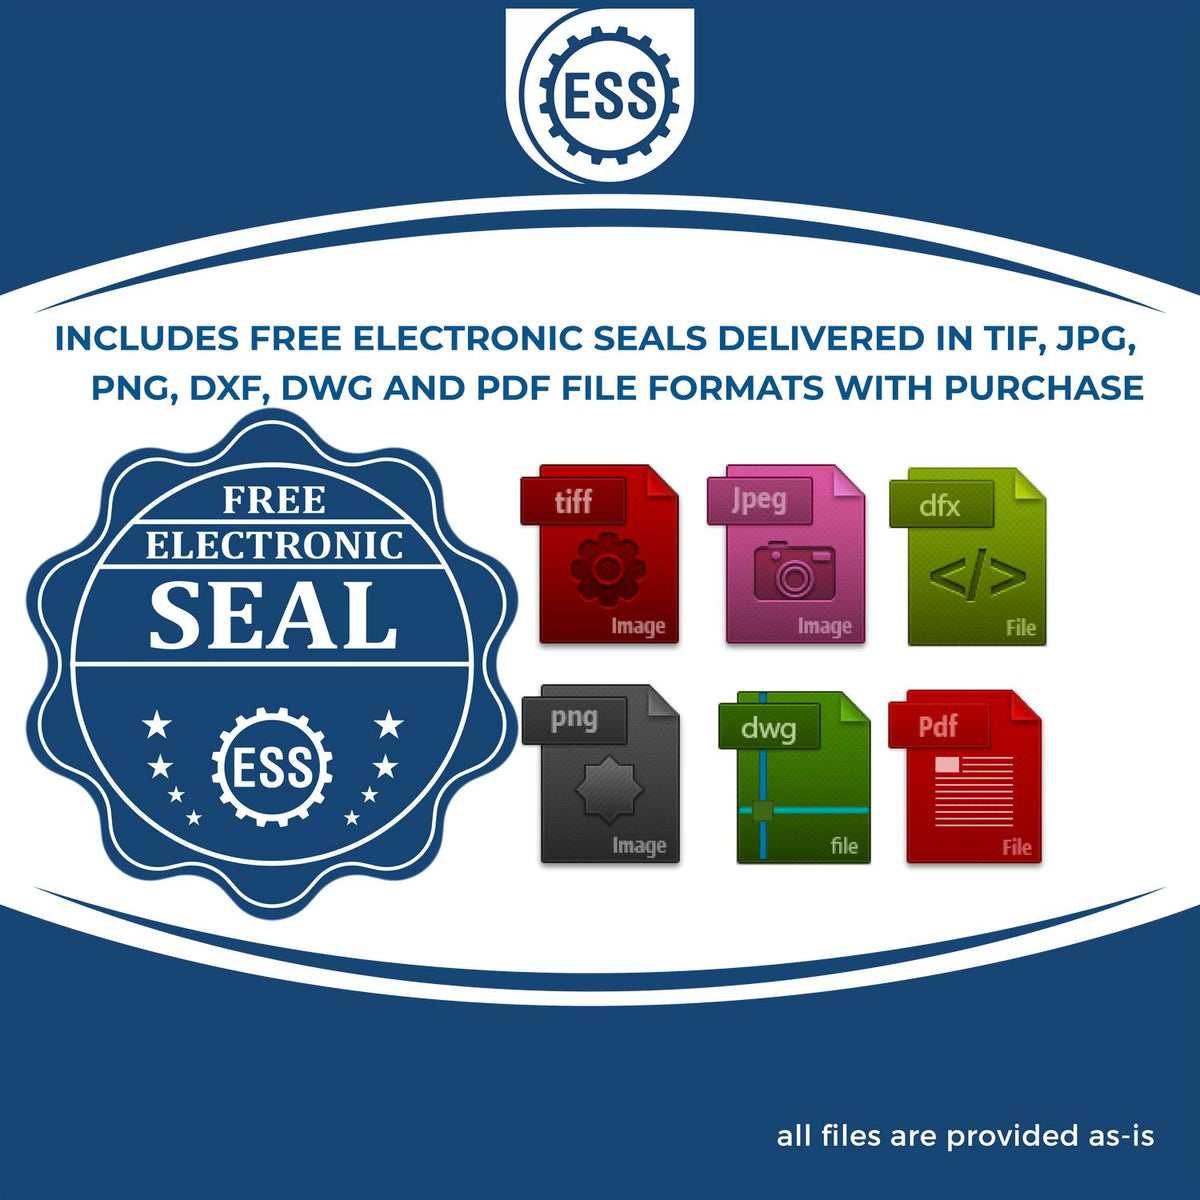 An infographic for the free electronic seal for the District of Columbia Geologist Desk Seal illustrating the different file type icons such as DXF, DWG, TIF, JPG and PNG.